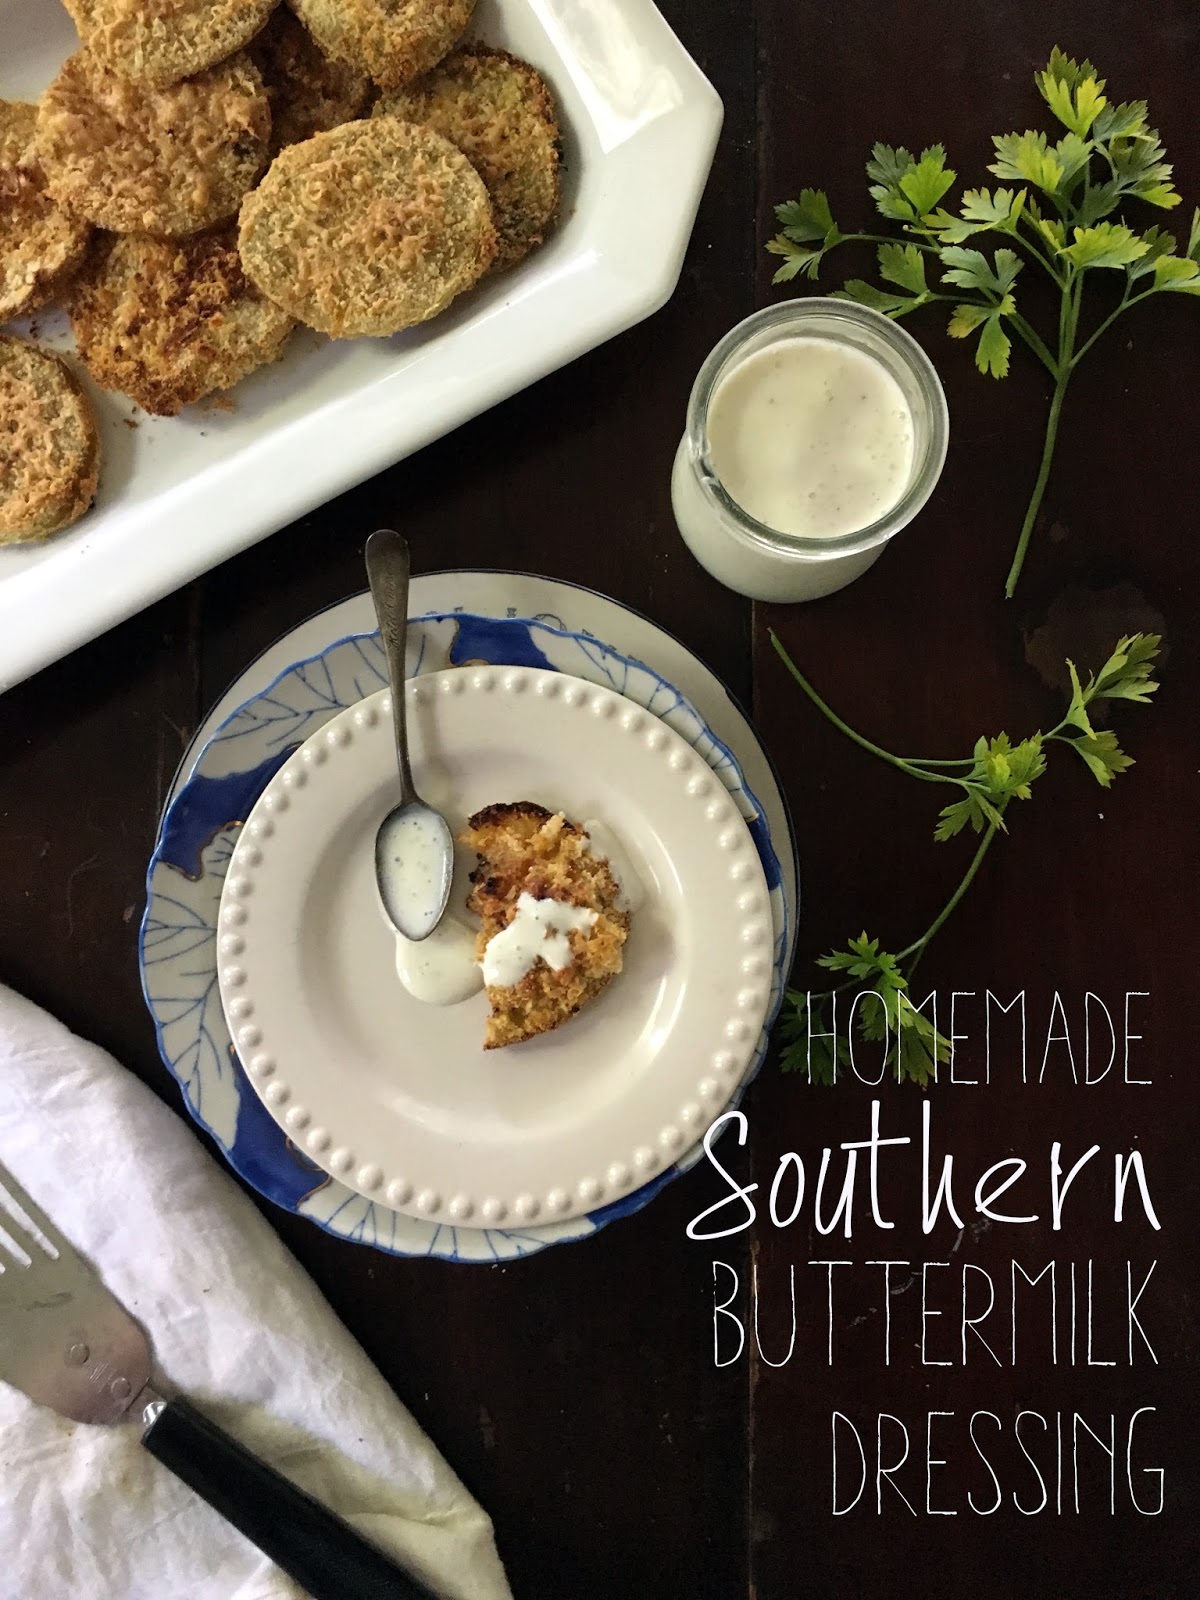 Notes from Maggie's Farm: Well Dressed | Homemade Southern Buttermilk ...